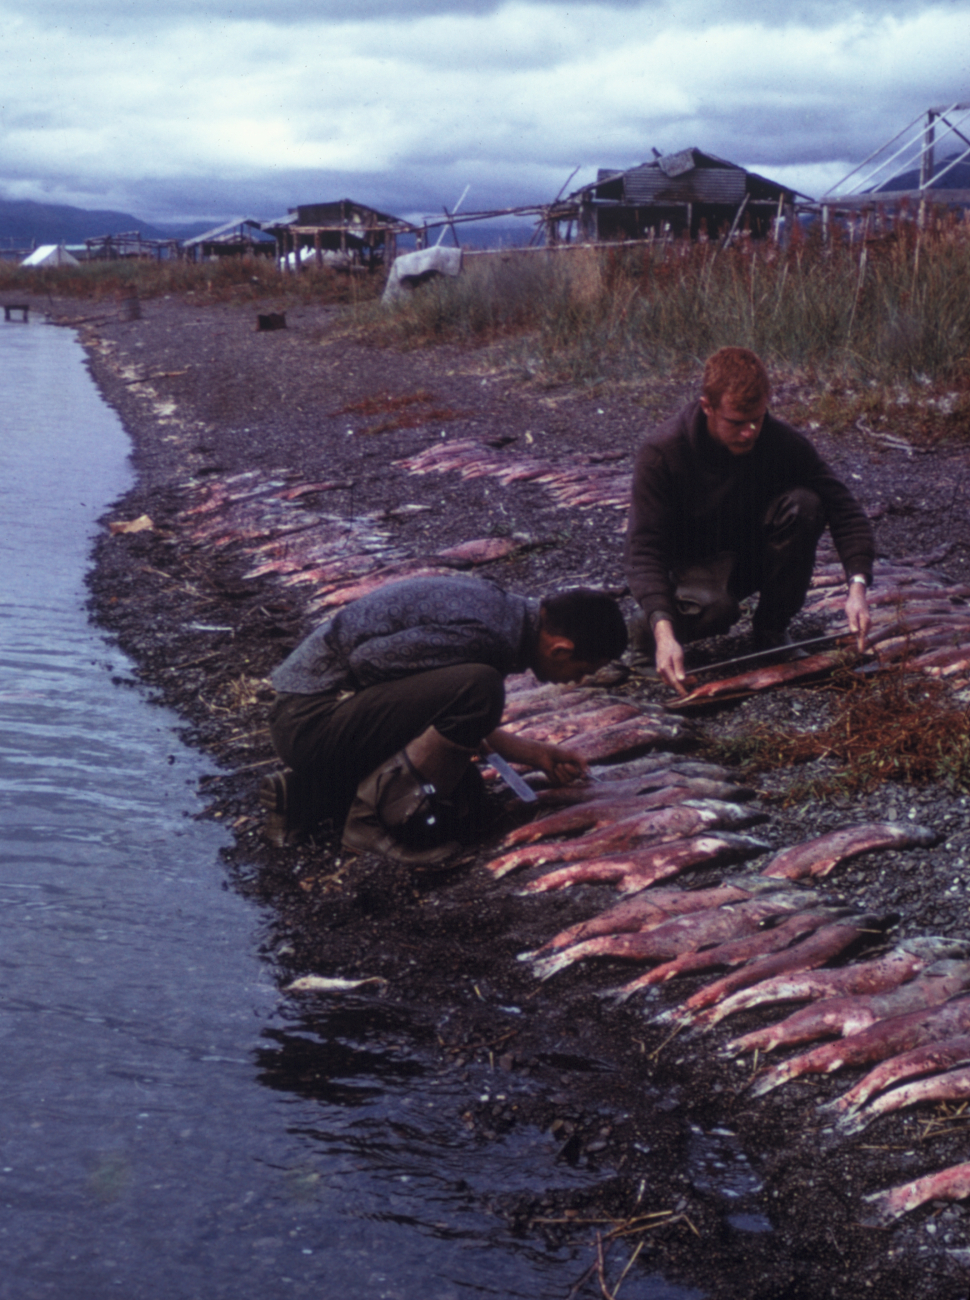 Sampling and measuring sockeye salmon after they have spawned and died